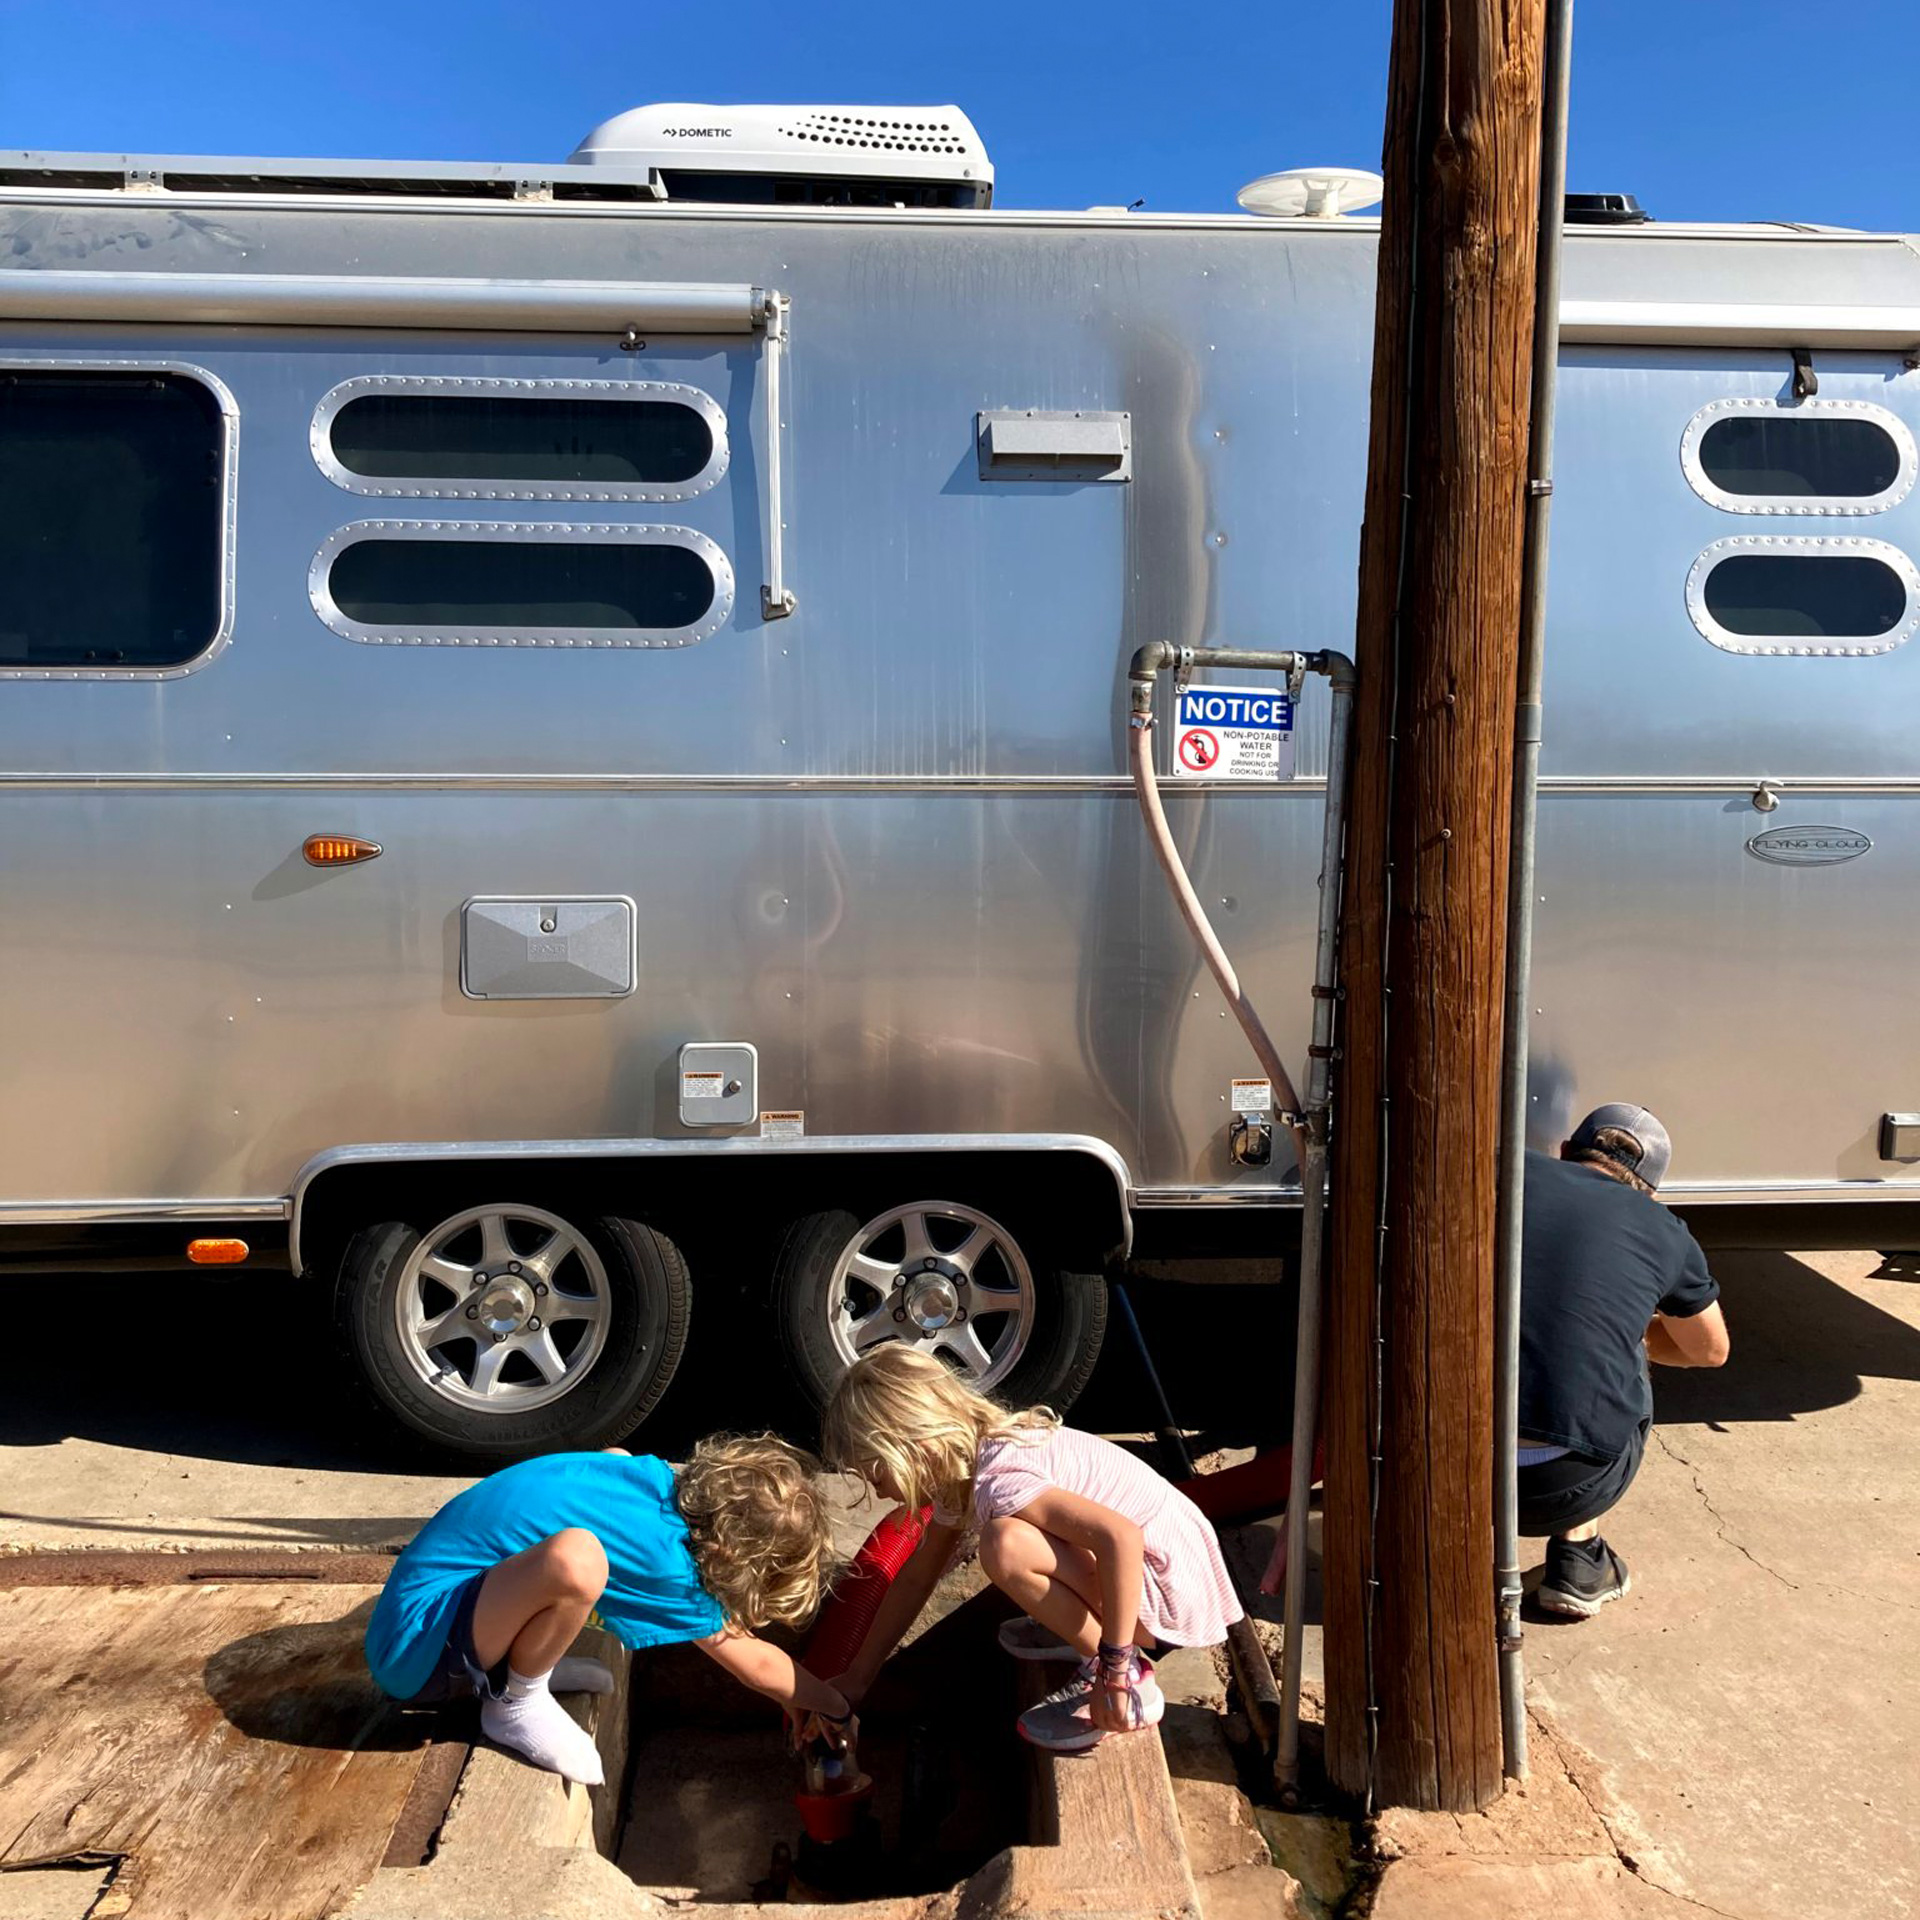 2 kids hooking up Airstream travel trailer with their dad in the desert.